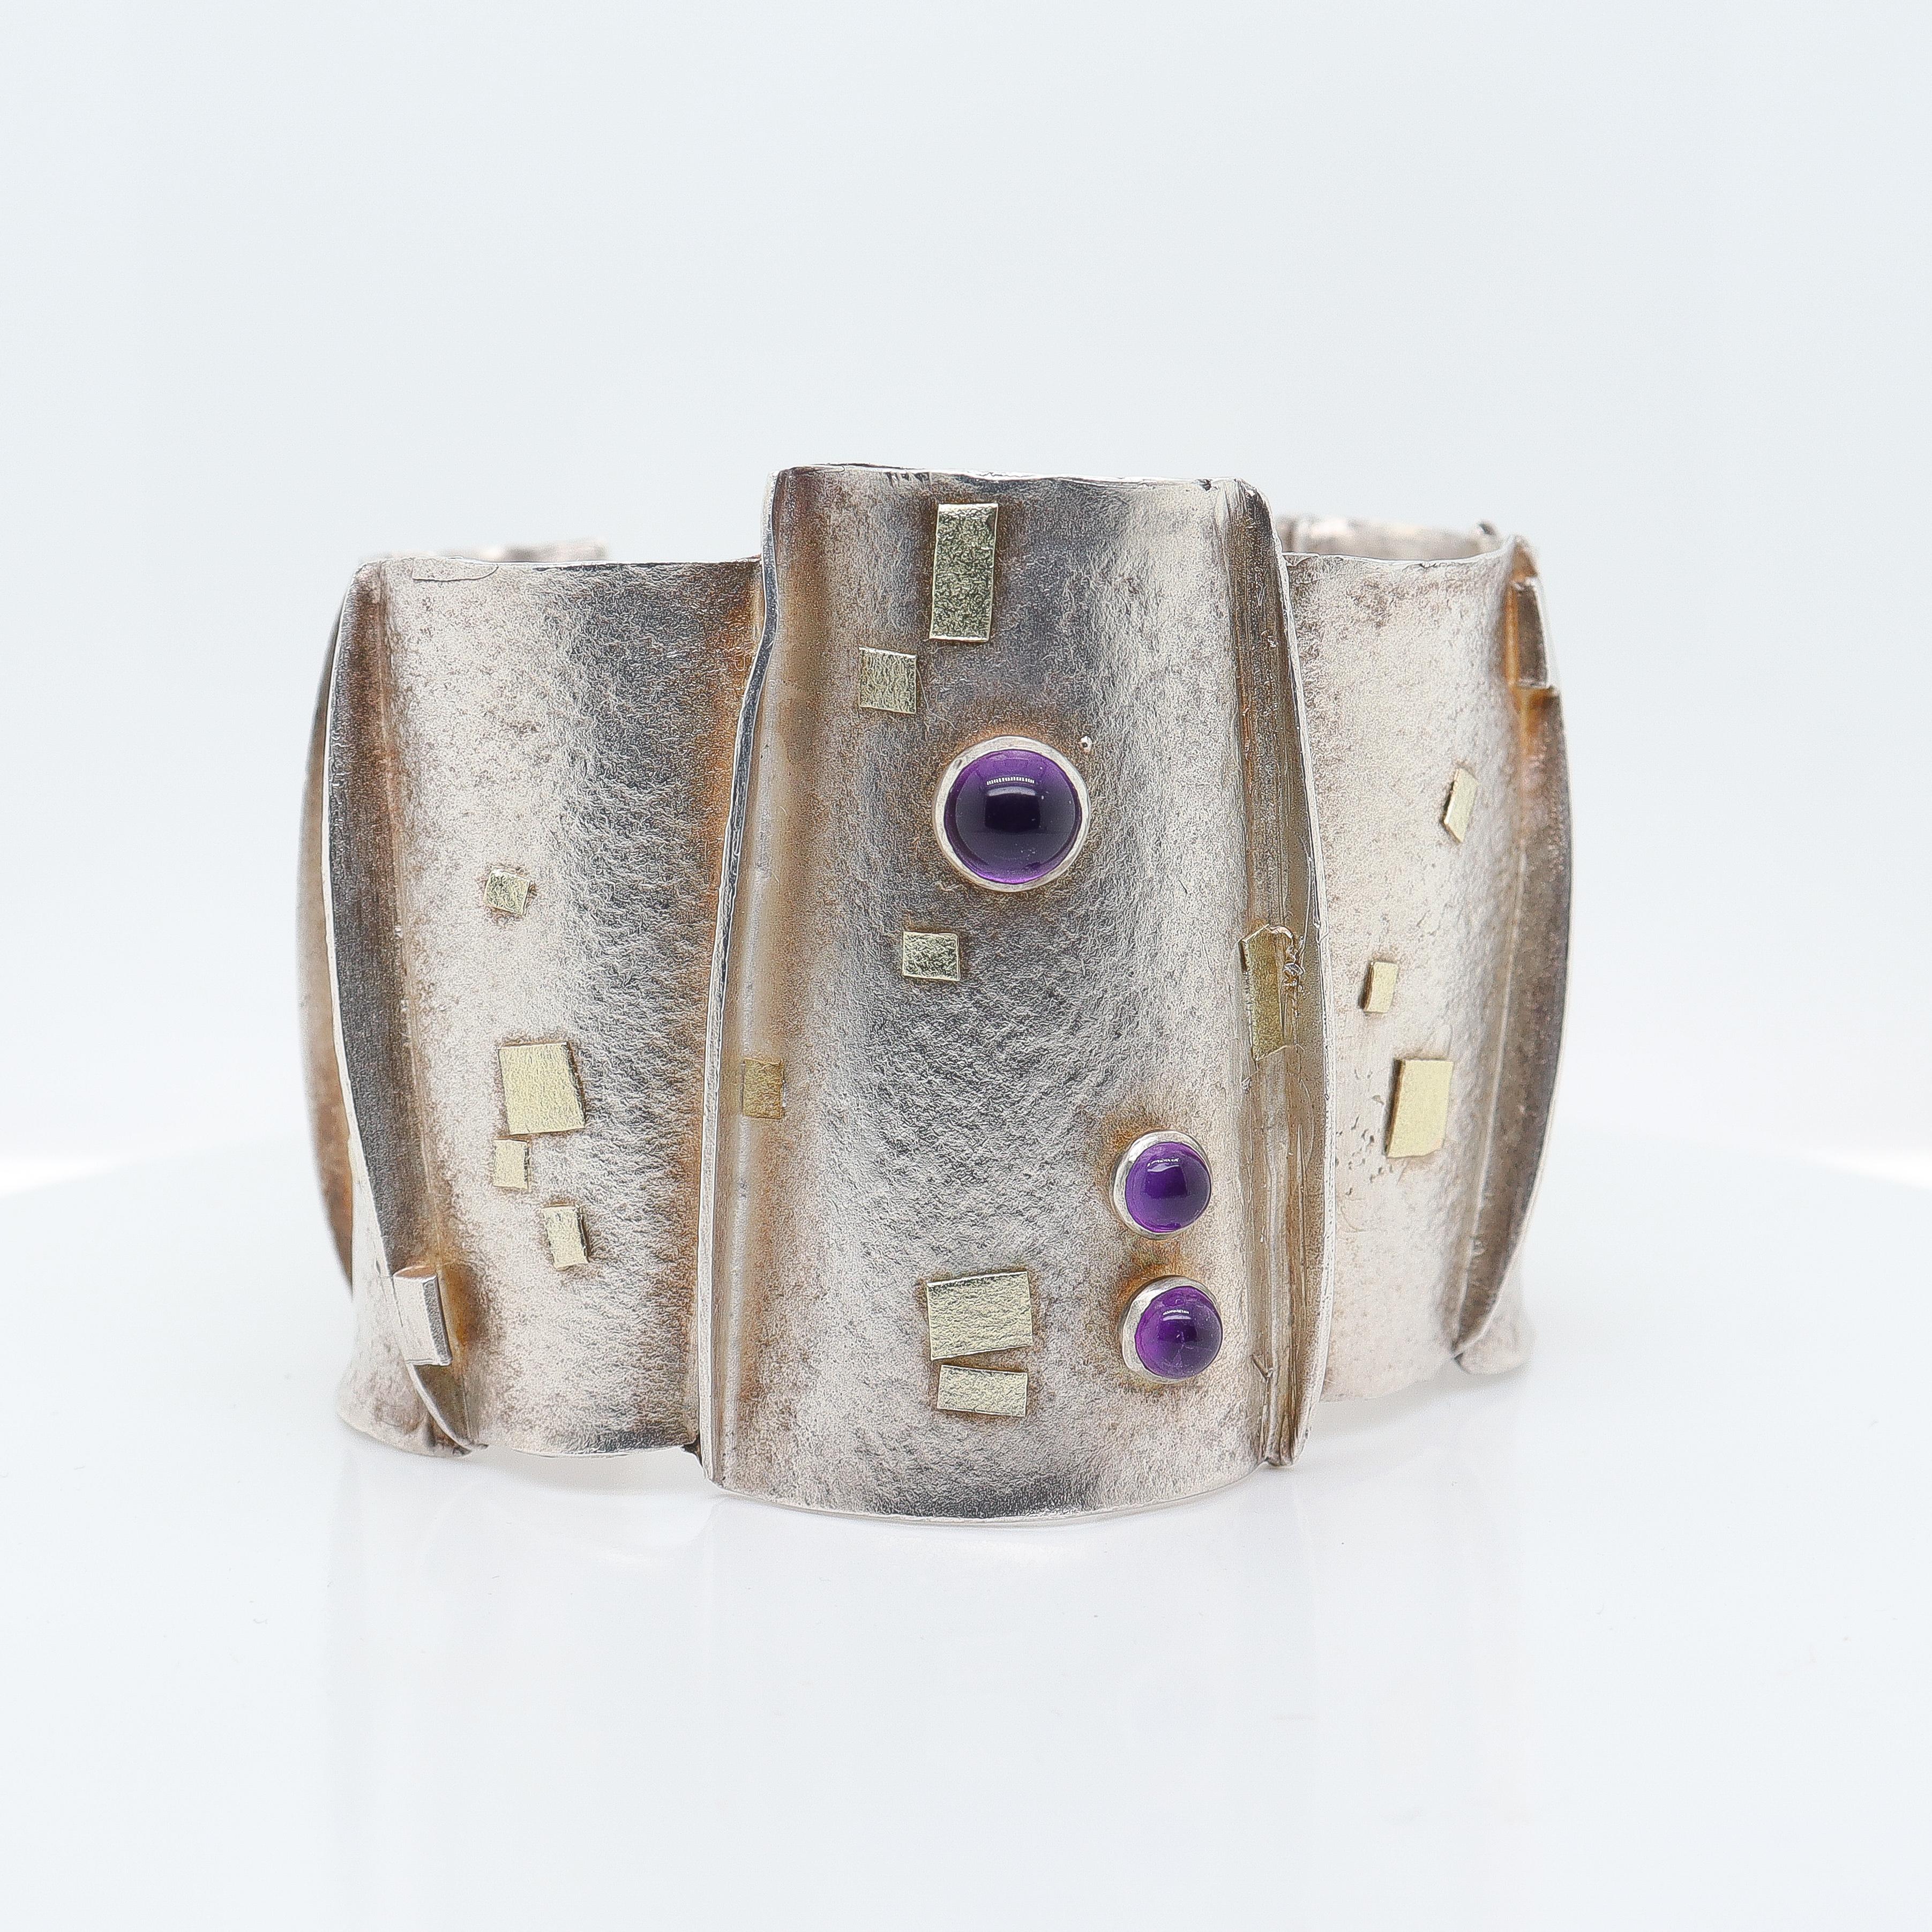 A fine vintage modernist bracelet in silver, gold and amethysts.

Constructed of 9 welded sections with a wonderful brushed finish to the front and interior, applied geometric gold elements, and bezel set amethyst cabochons.

Attributed to Enid